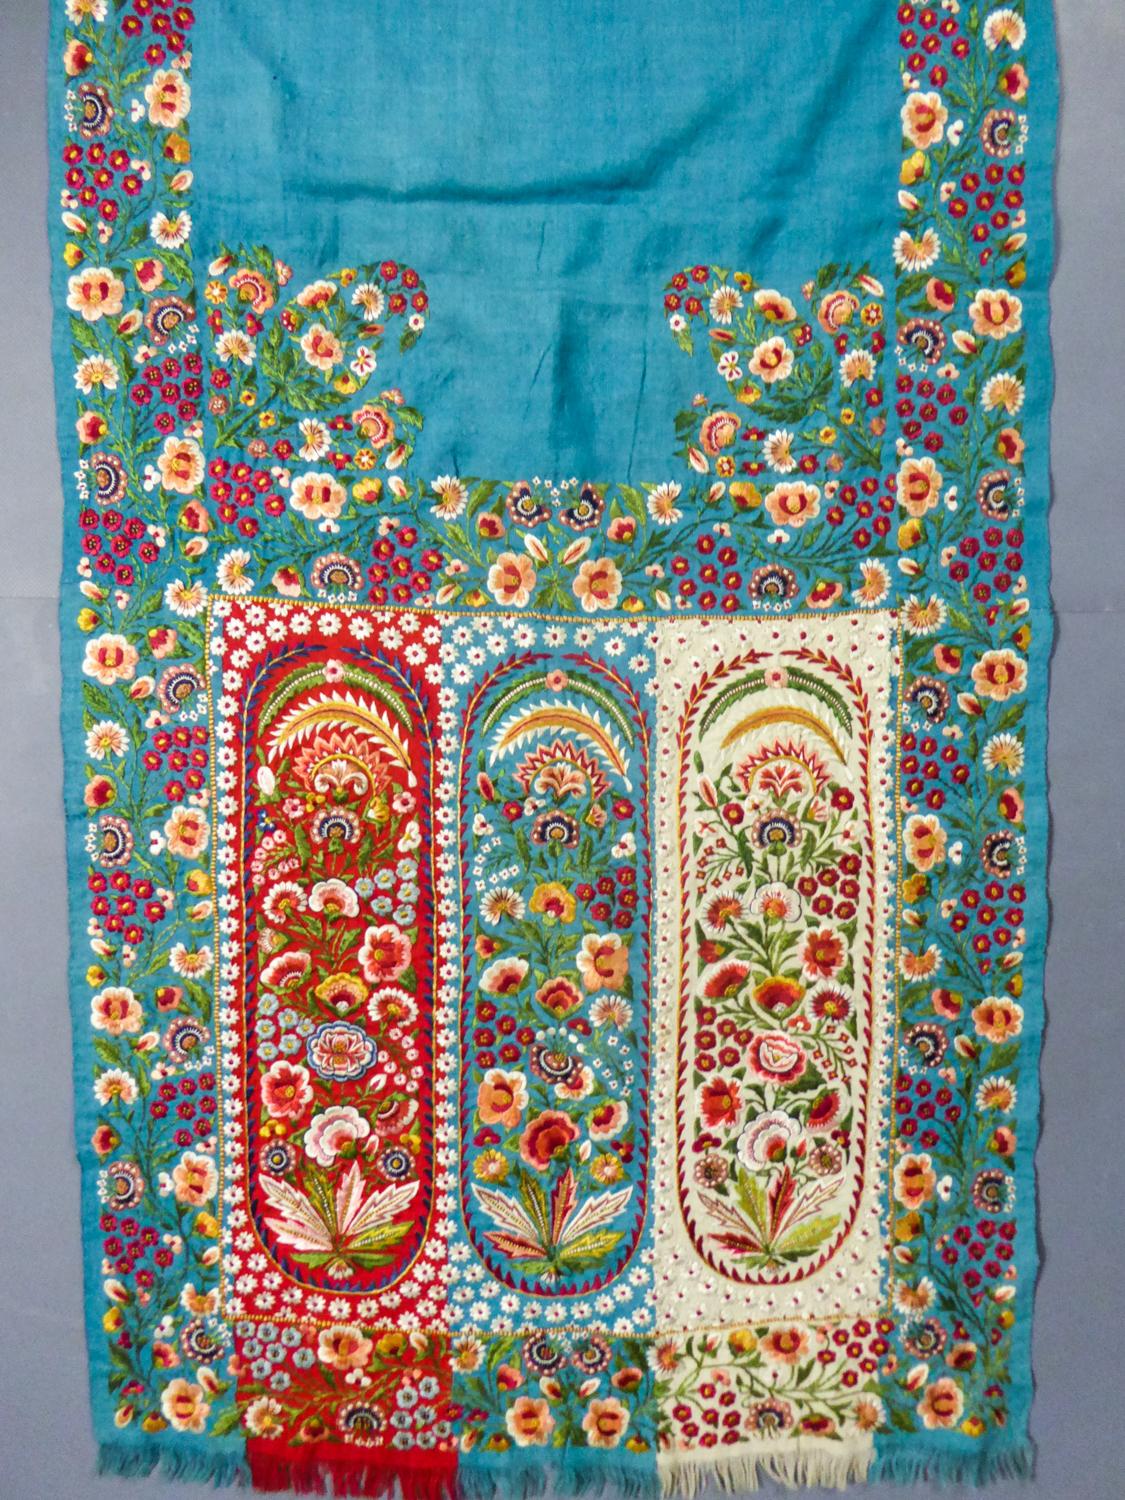 Circa 1830/1860
British India Company

Rich turquoise pashmina scarf densely embroidered with harlequin palms, Indian production from Delhi in the 19th century for fashion in England and Europe. Turquoise pashmina twill background with polychrome